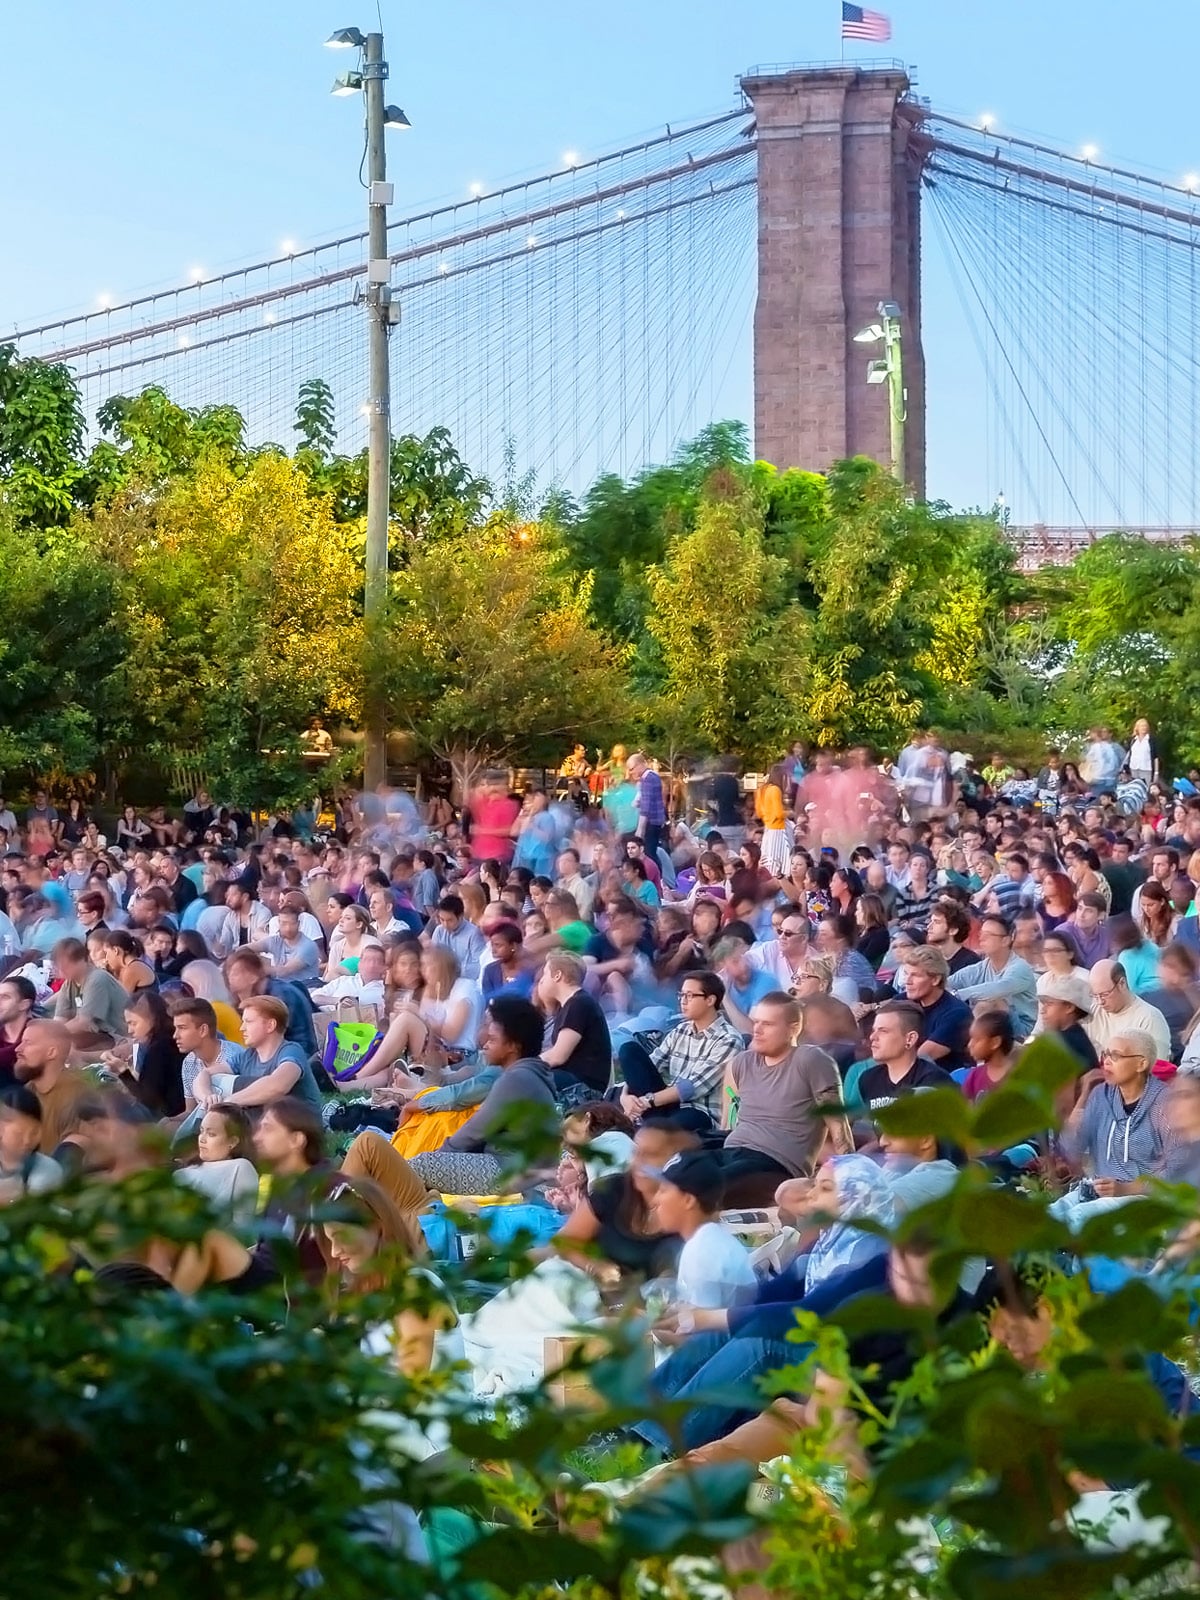 Crowd sitting on the lawn watching a movie at night. The Brooklyn Bridge is seen in the distance.